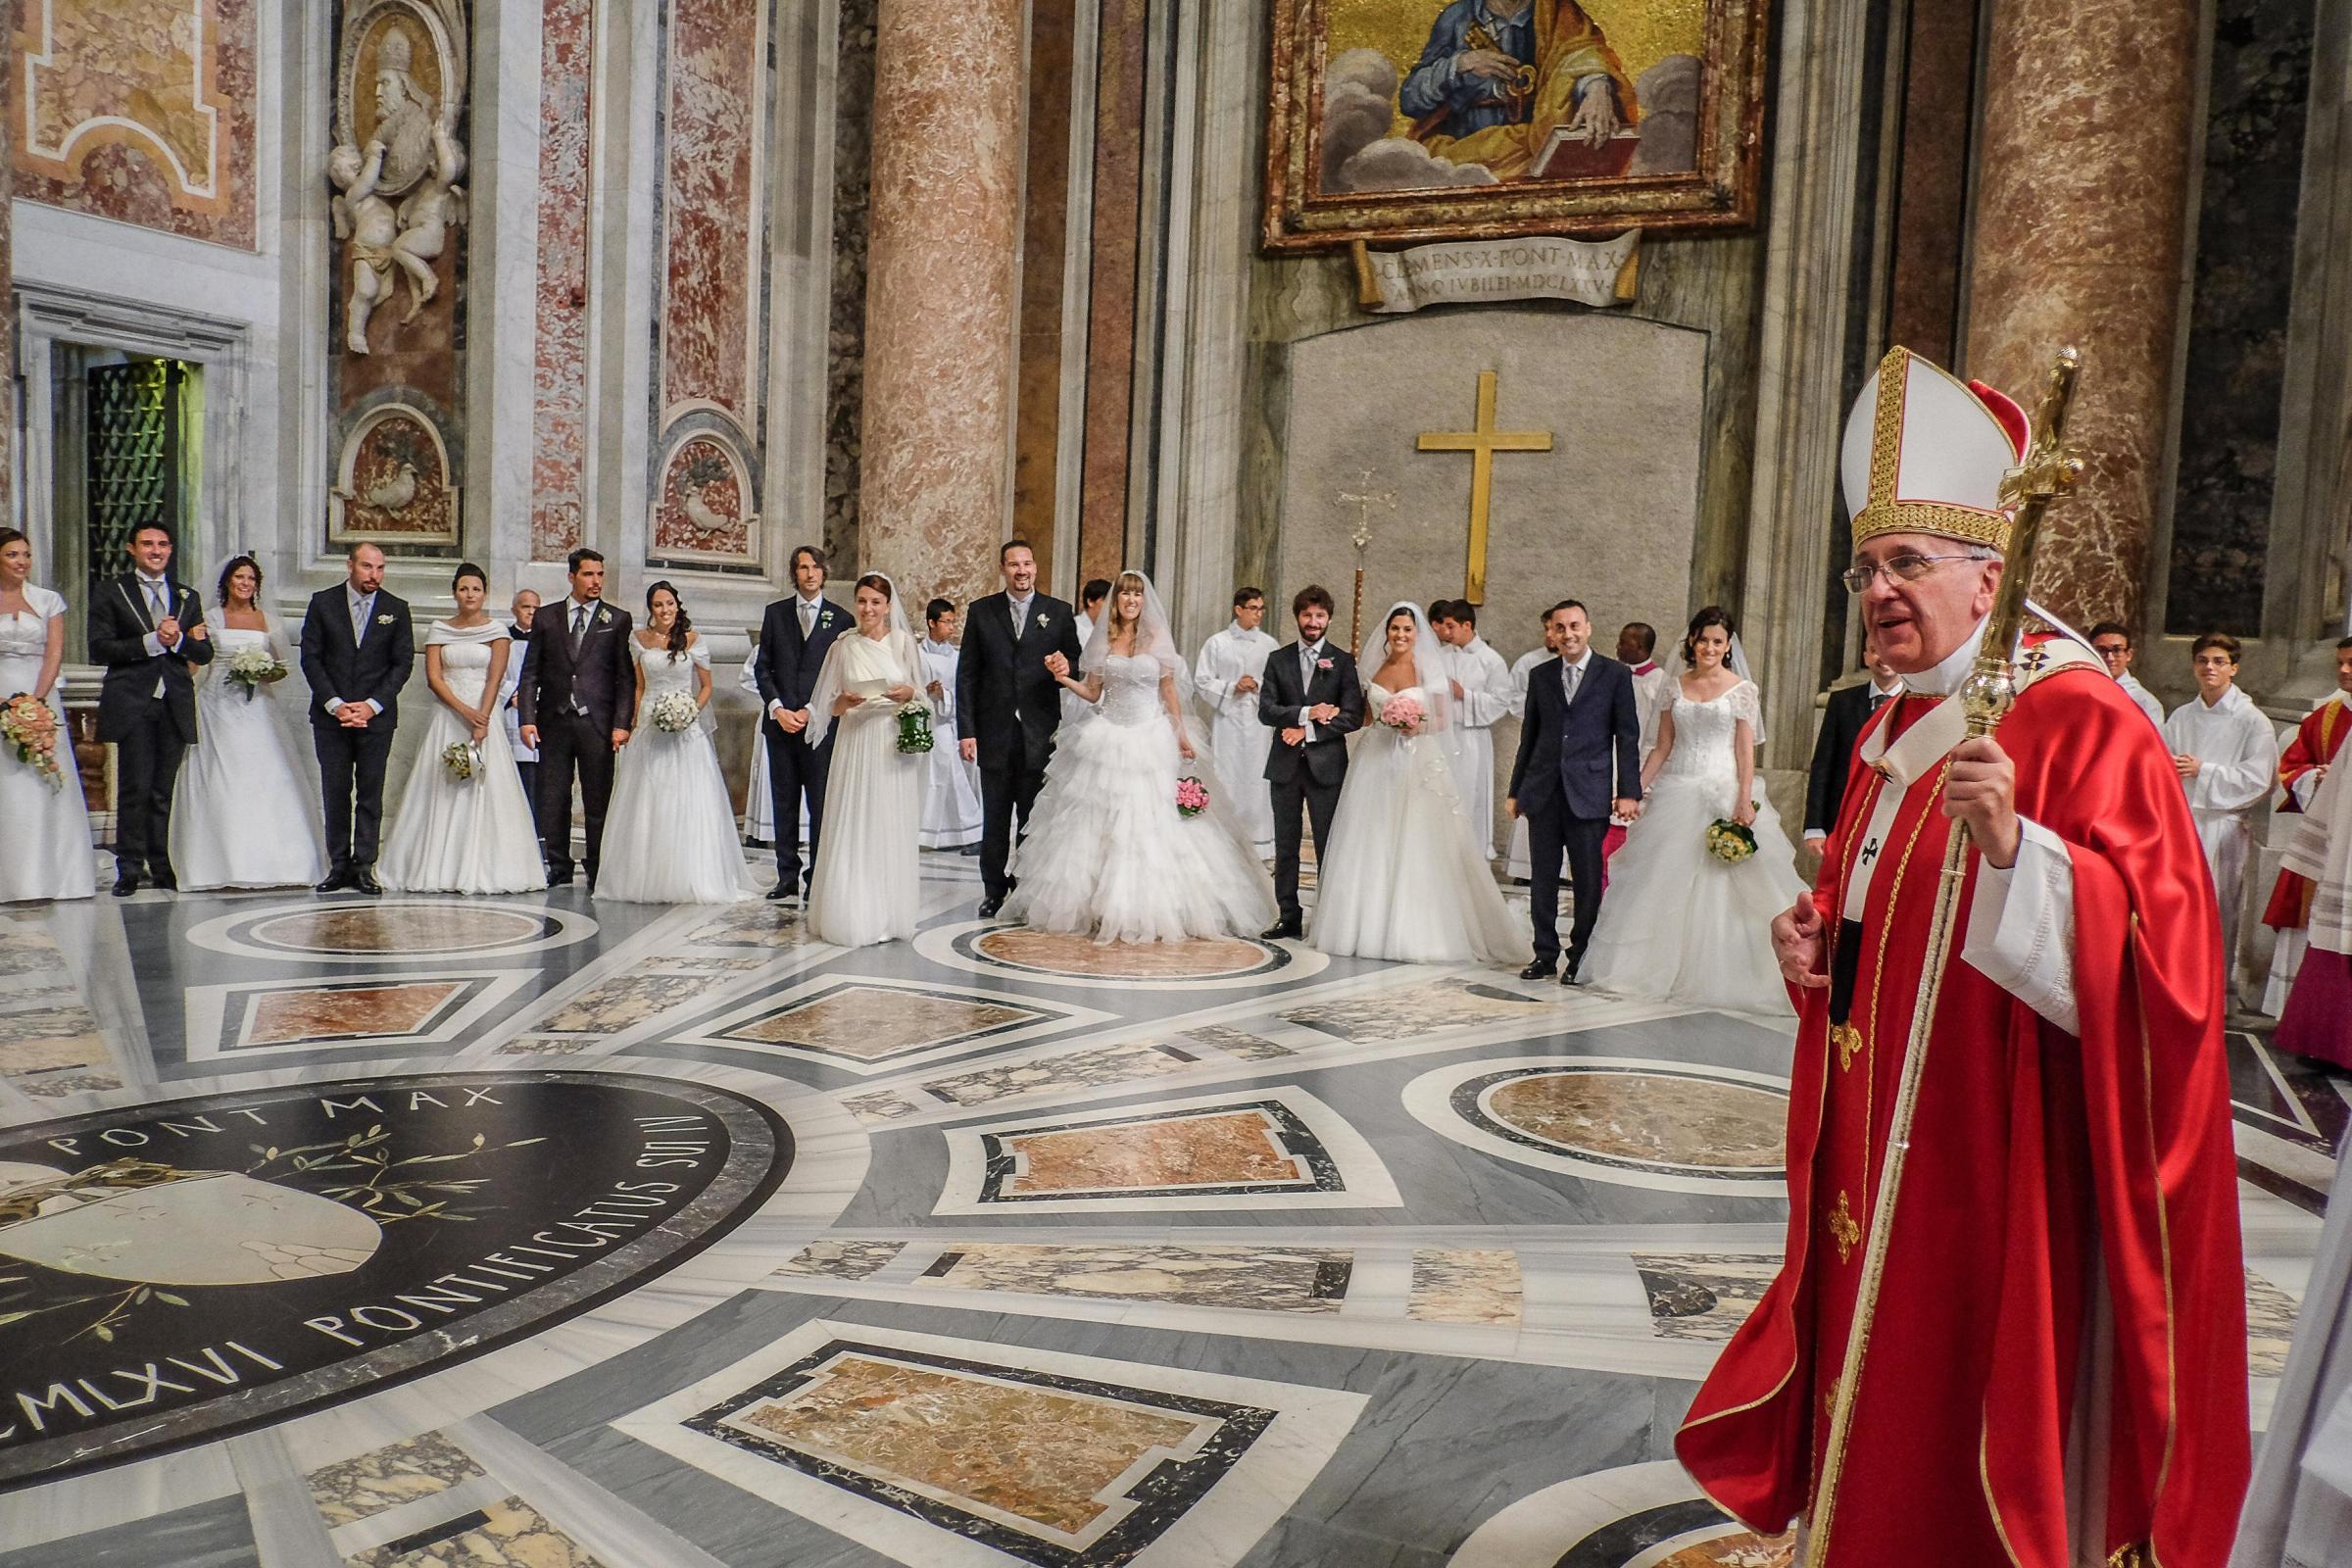 Pope Francis celebrates the wedding of 20 couples in St. Peter's Basilica in Vatican City on Sept. 14, 2014.